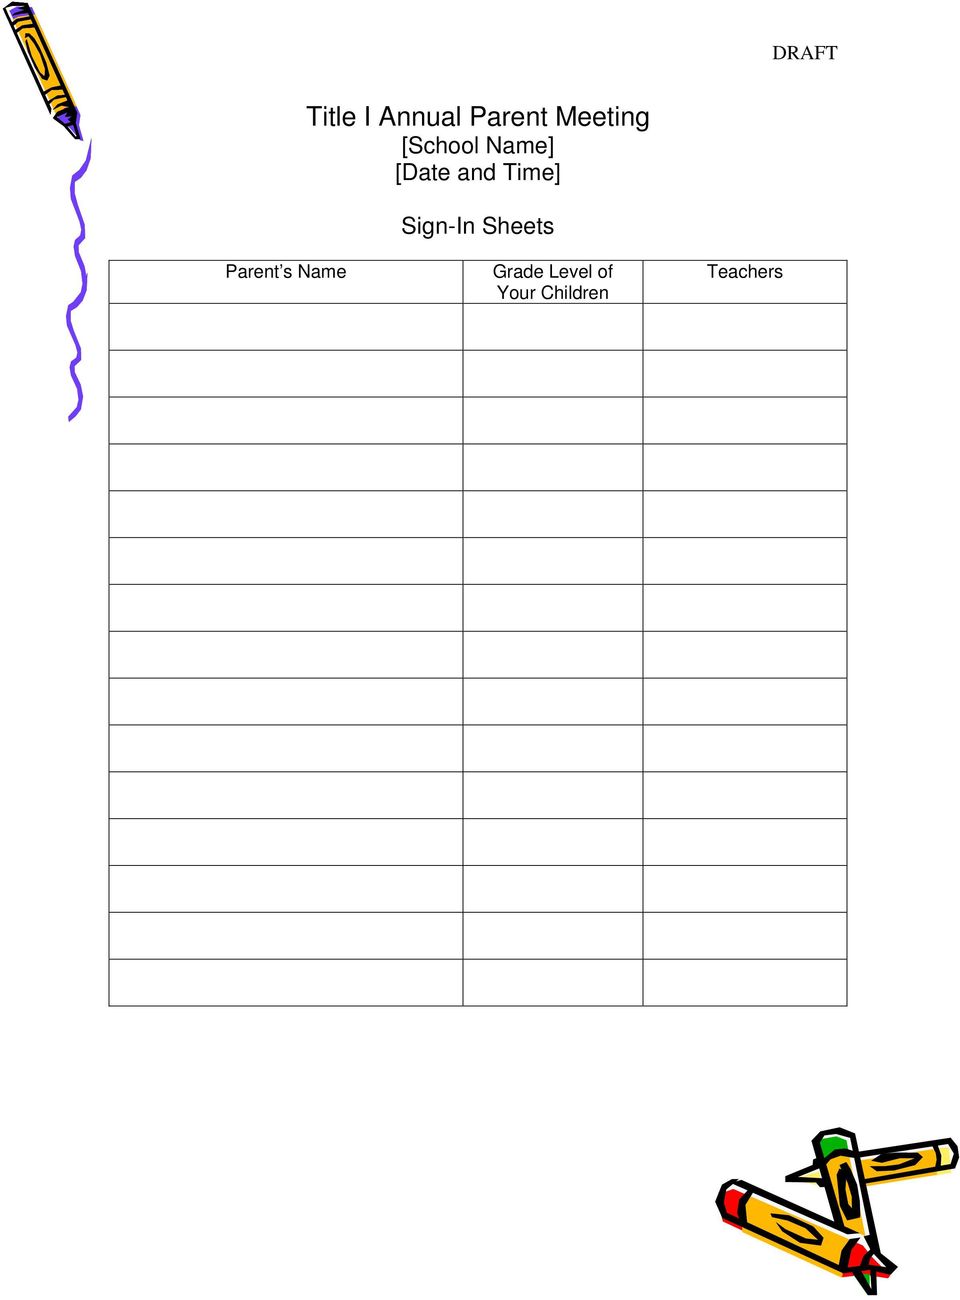 Sign-In Sheets Parent s Name